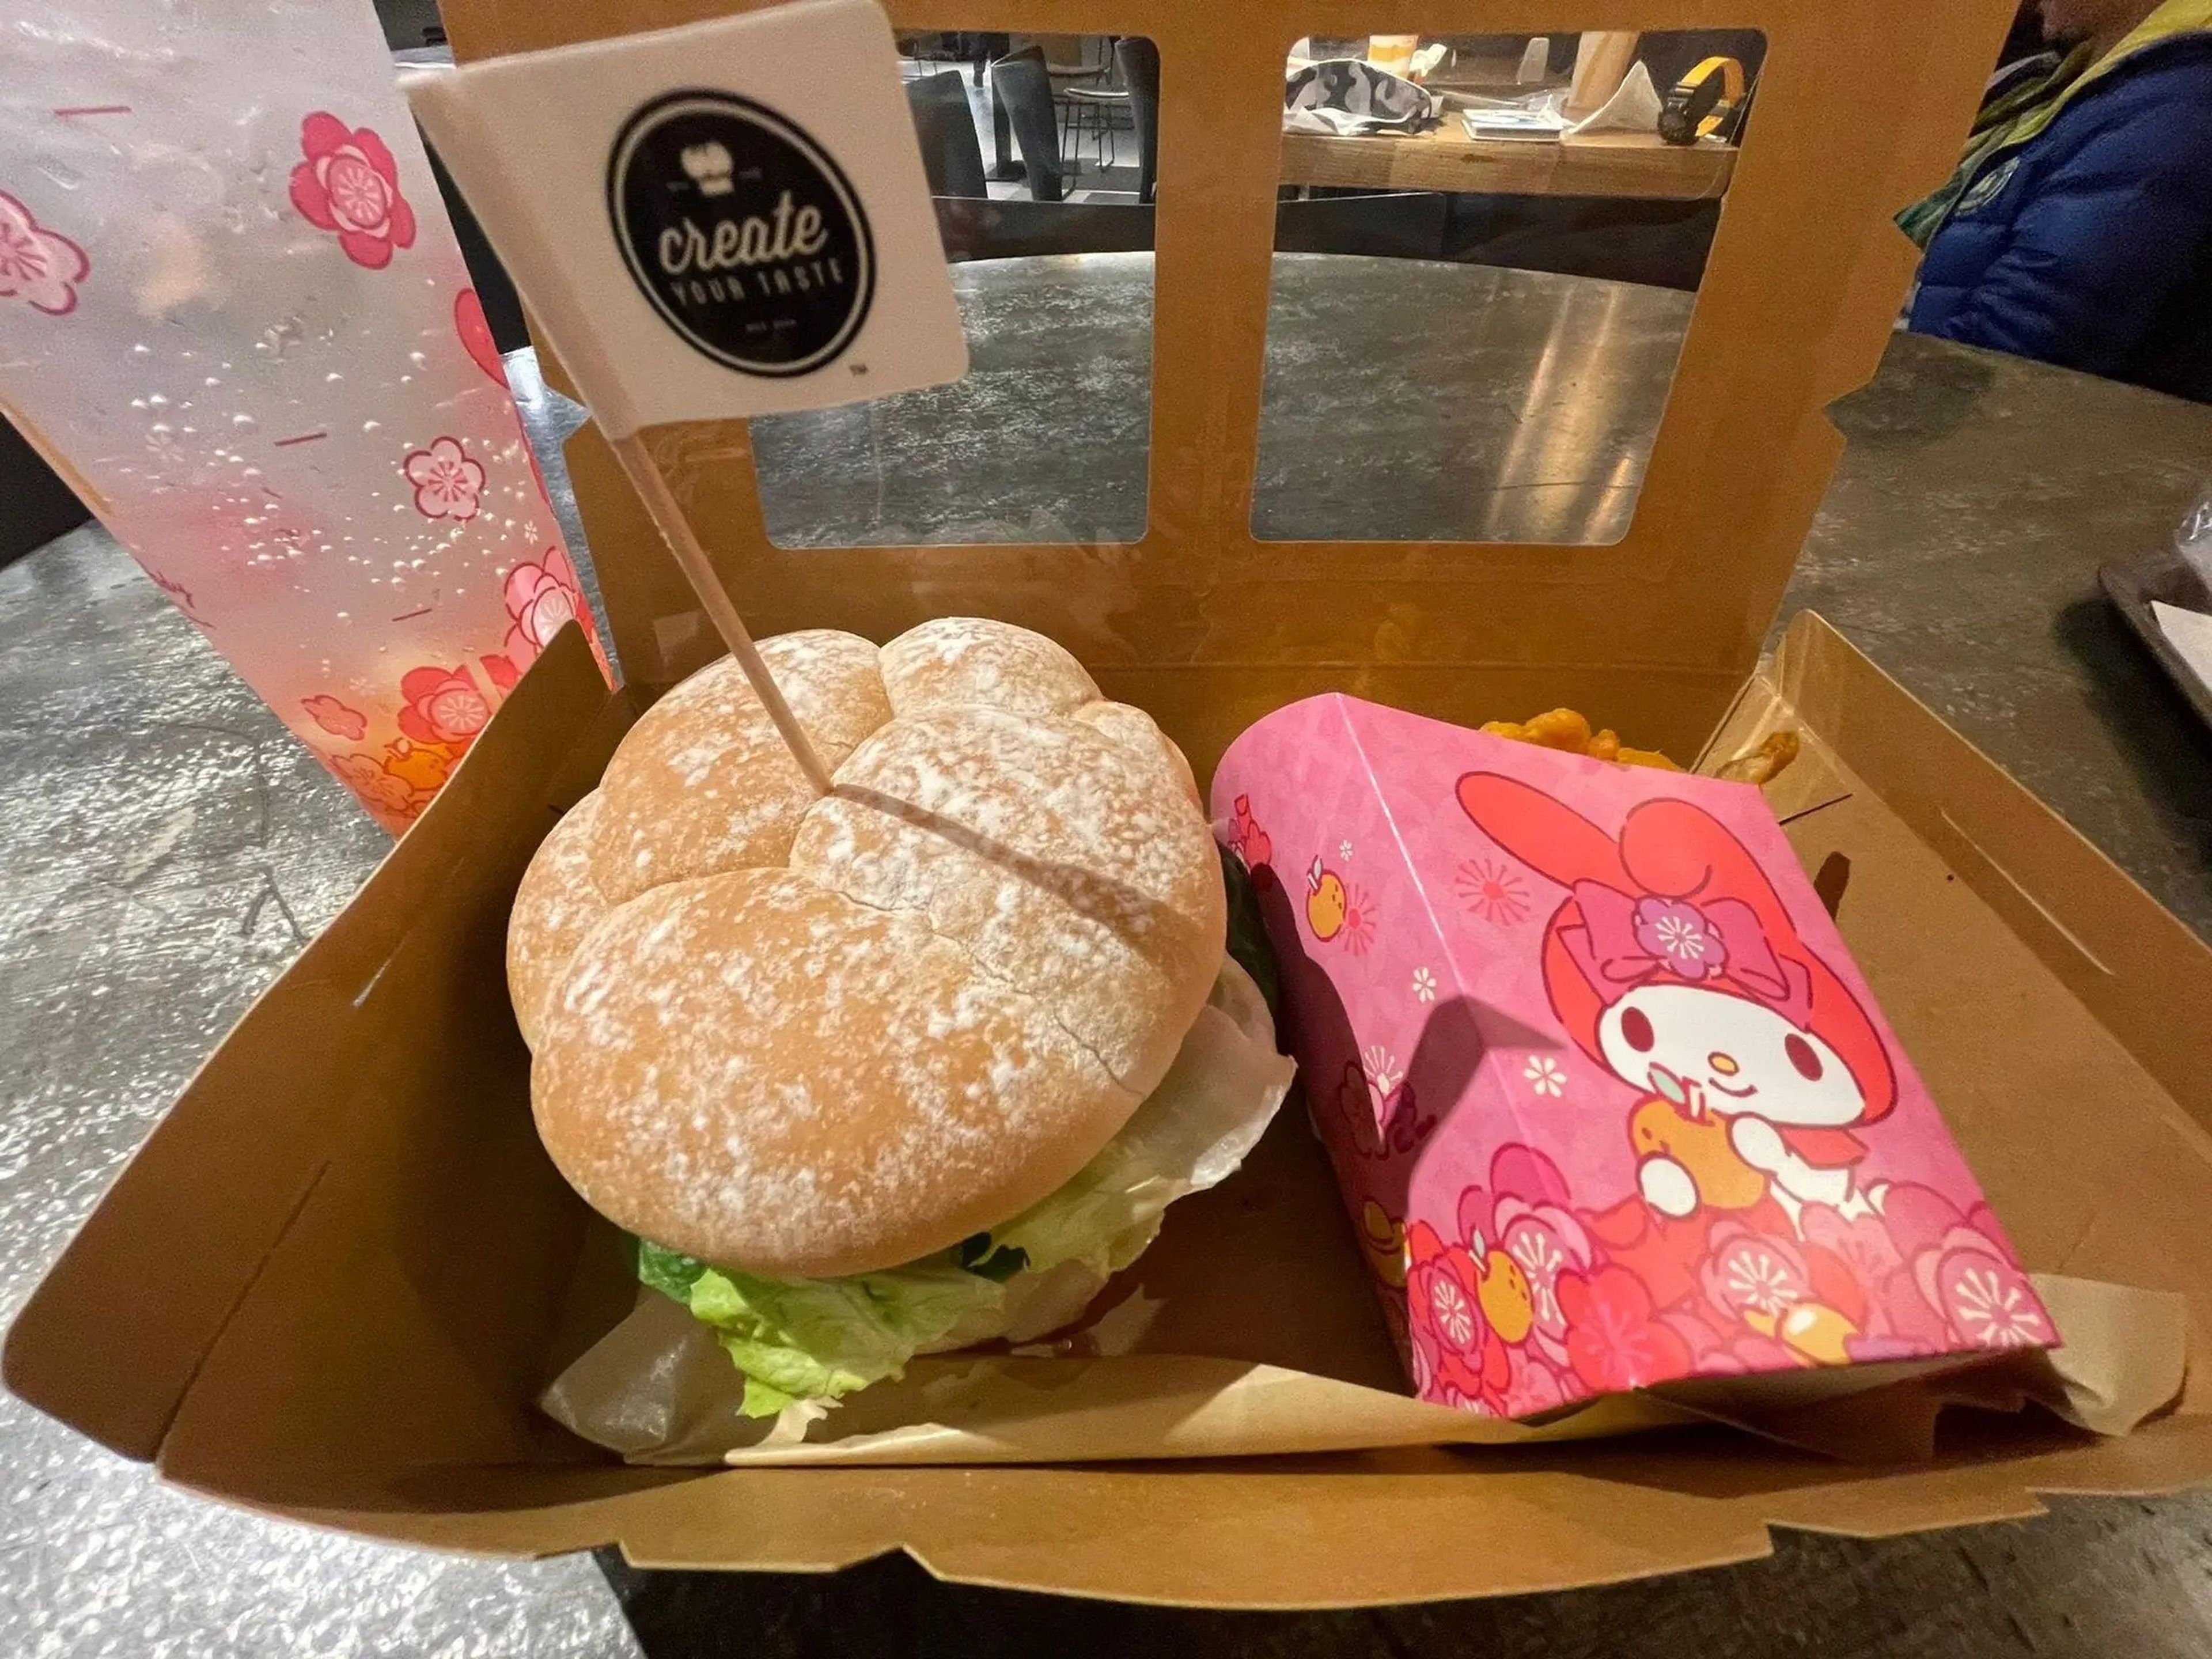 Close up of burger with brioche bun and container of curly fries with cartoon rabbit on it